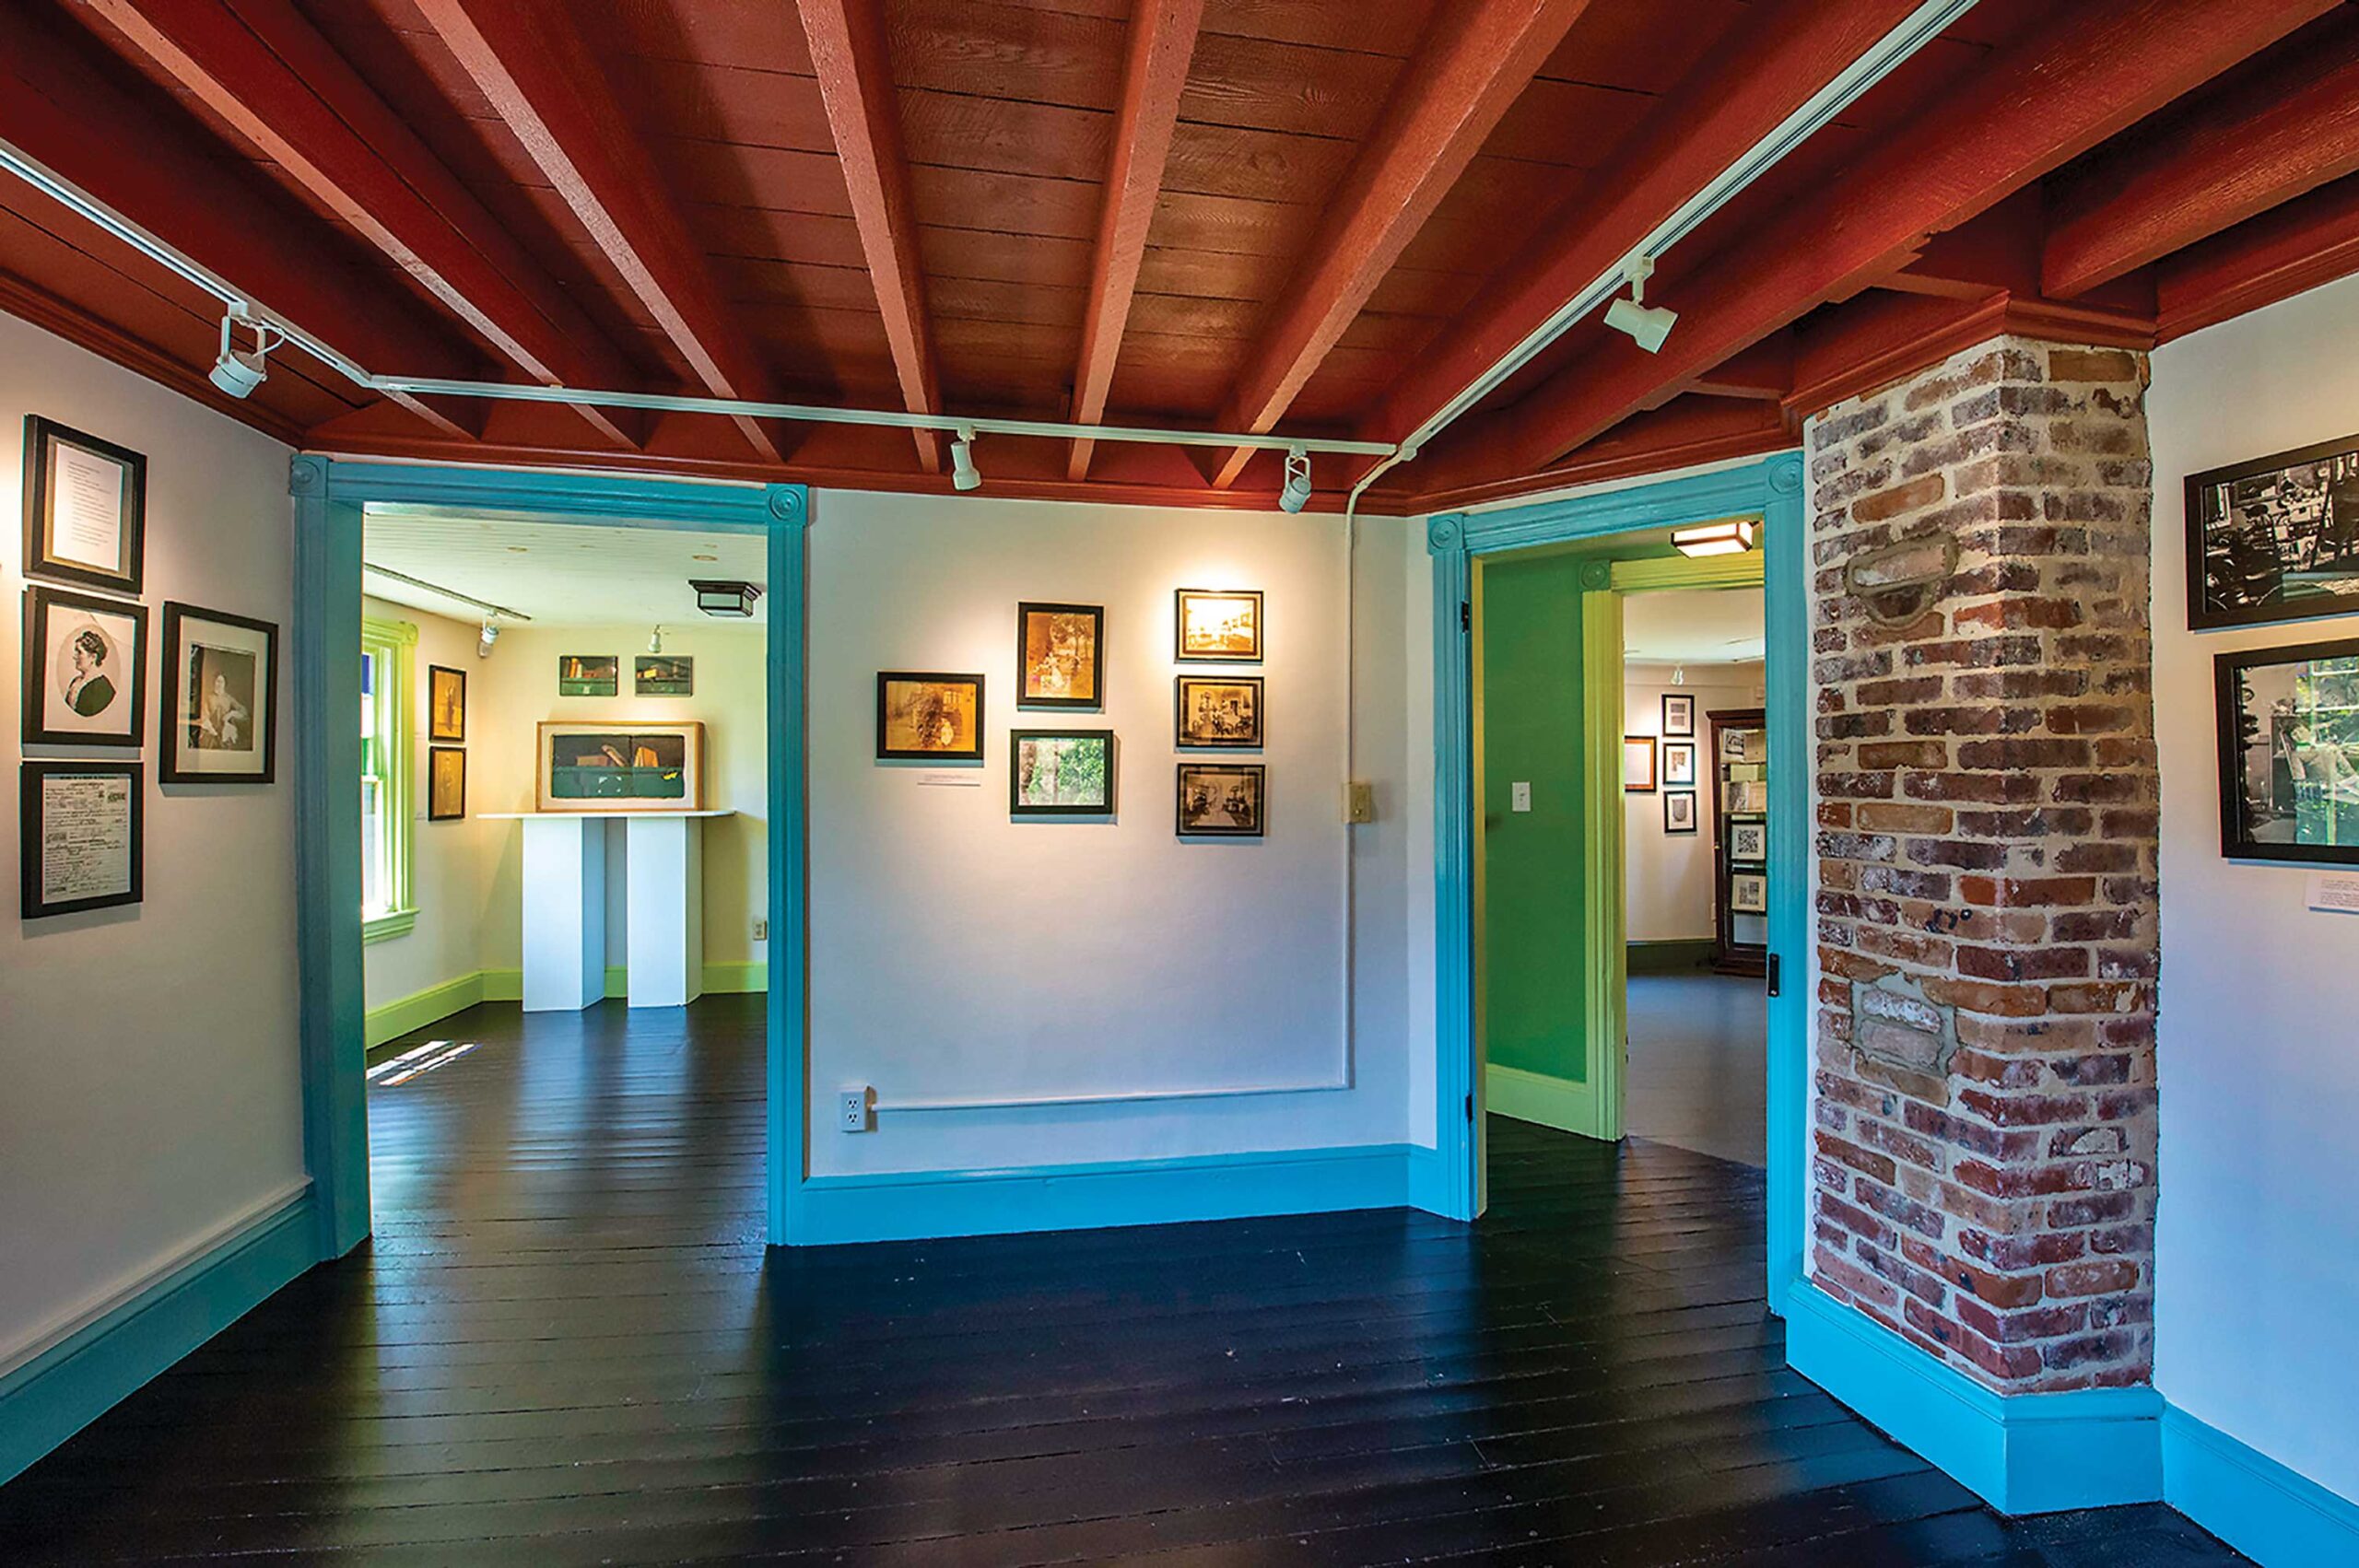 Five former bedrooms were converted into gallery space for the museum’s year-round schedule of exhibitions that showcase artists past and present. 